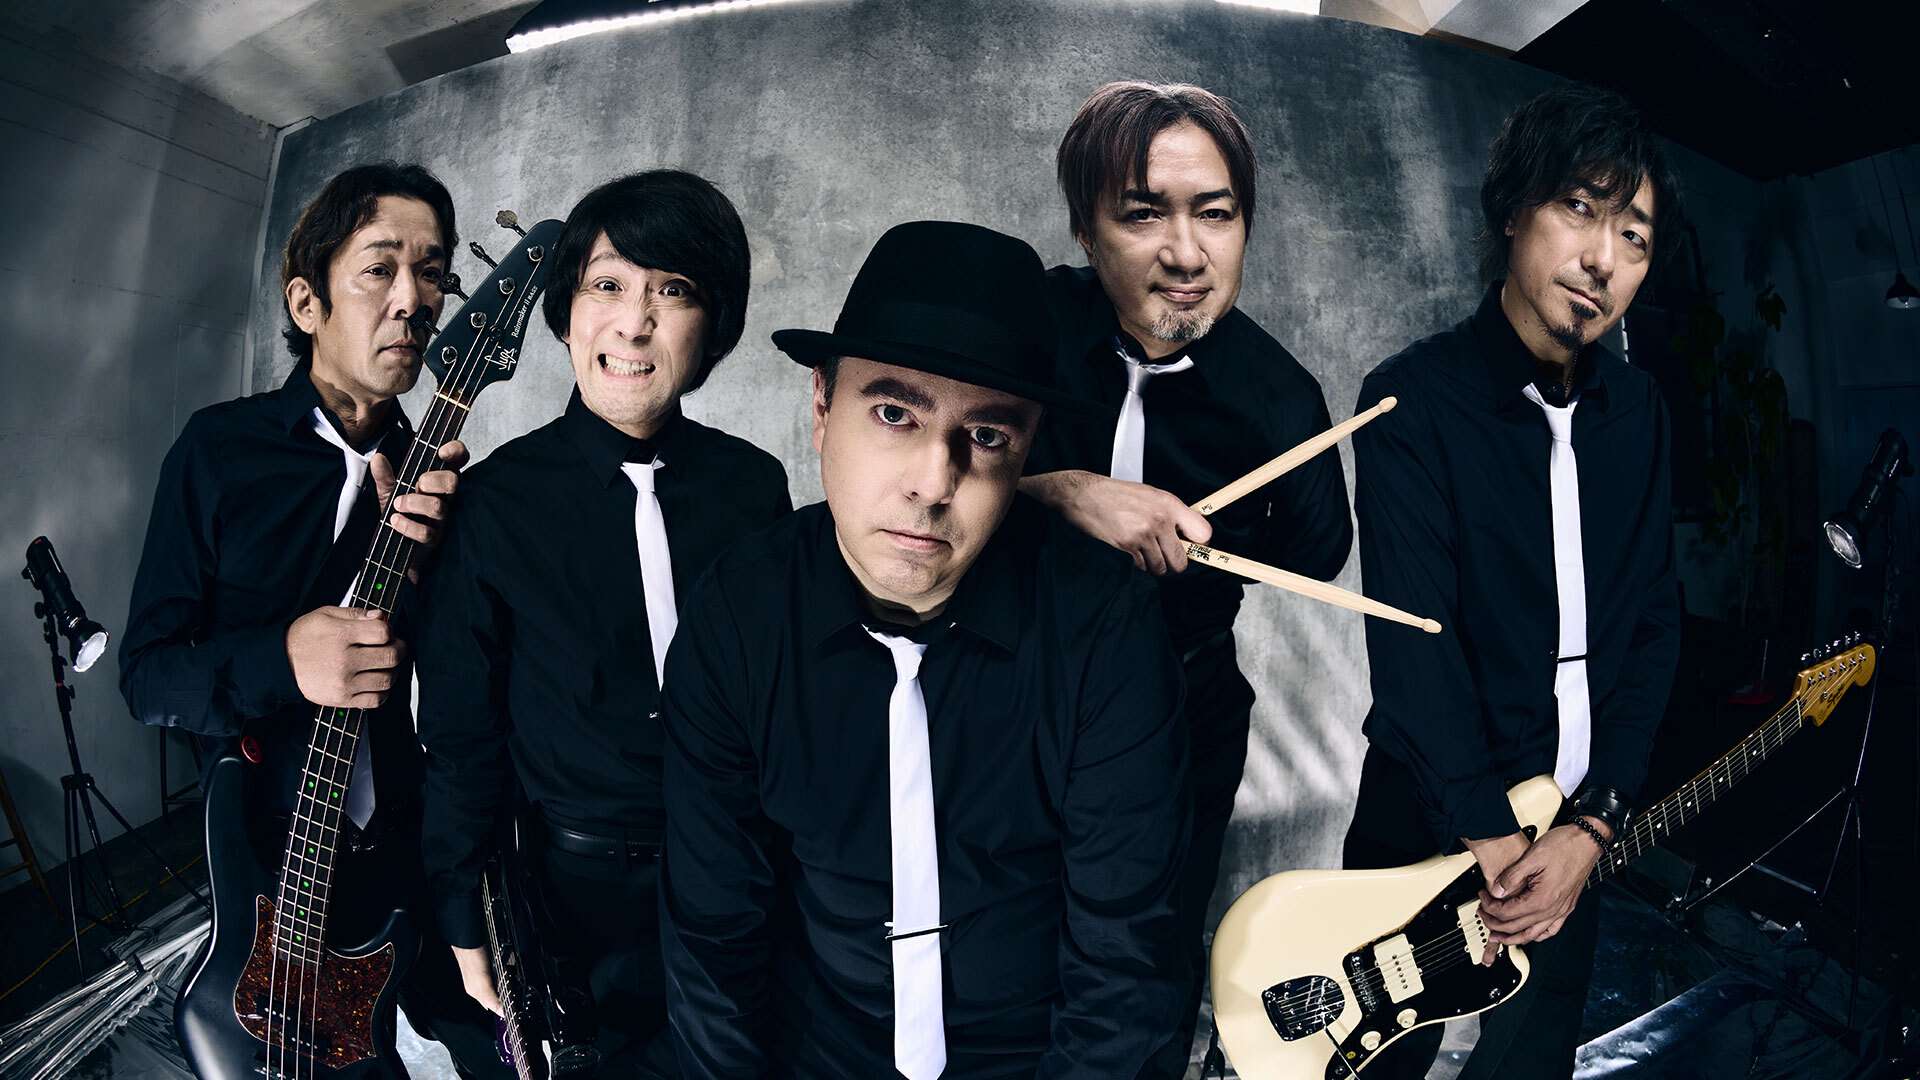 A photo of The Primals band members wearing matching black dress shirts and white ties looking into the camera.